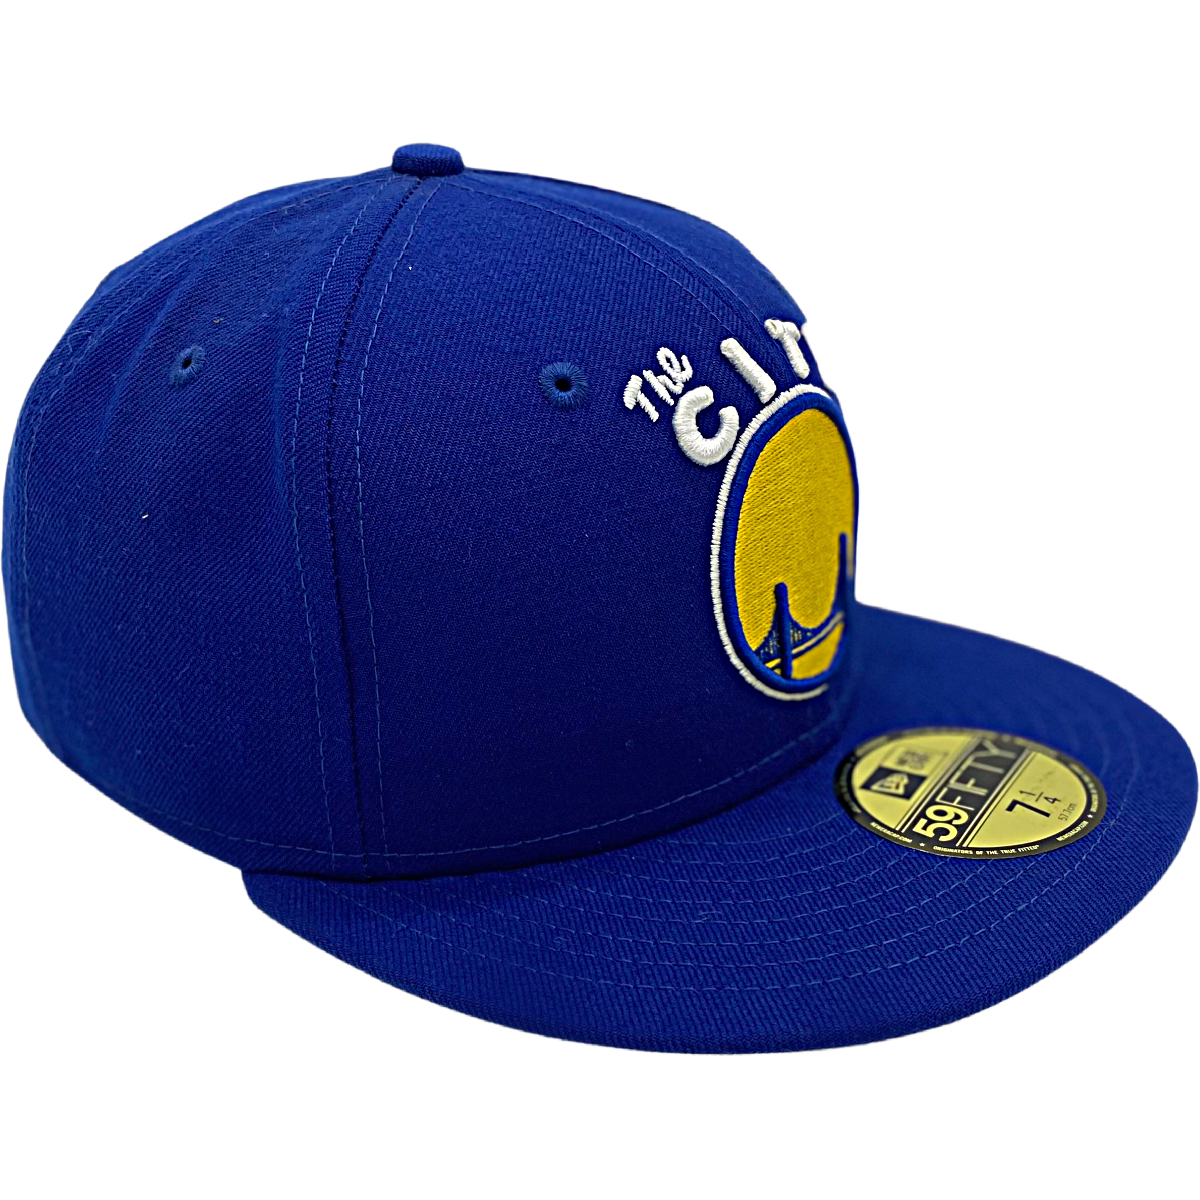 GOLDEN STATE WARRIORS THE CITY NEW ERA 59FIFTY HAT-ROYAL BLUE NVSOCCER.COM THE COLISEUM